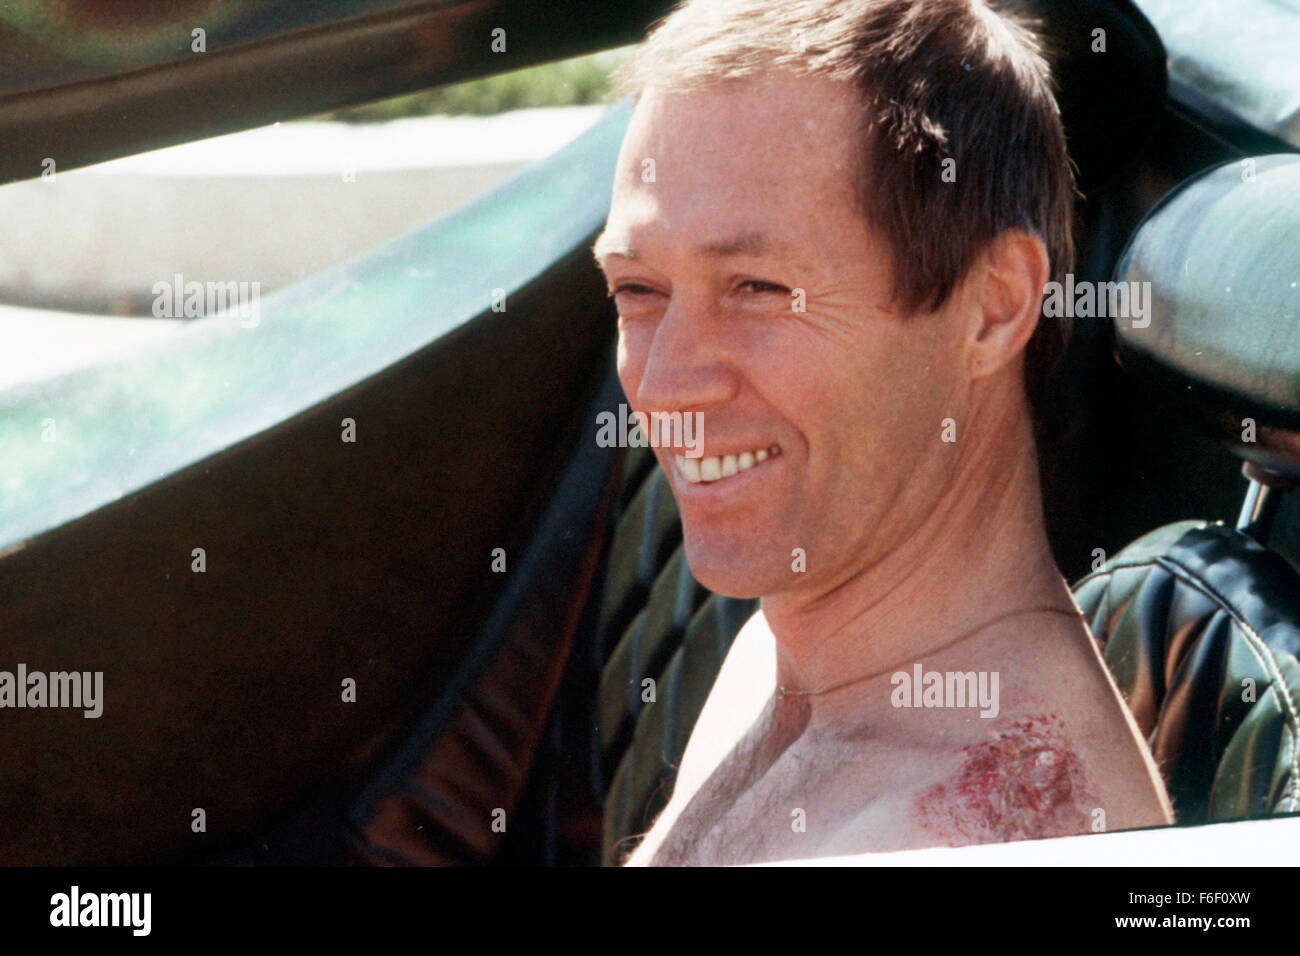 Apr 01, 1975; Los Angeles, CA, USA; DAVE CARRADINE as Frankenstein in the action, sport, sci-fi film 'Death Race 2000' directed by Paul Bartel. Stock Photo